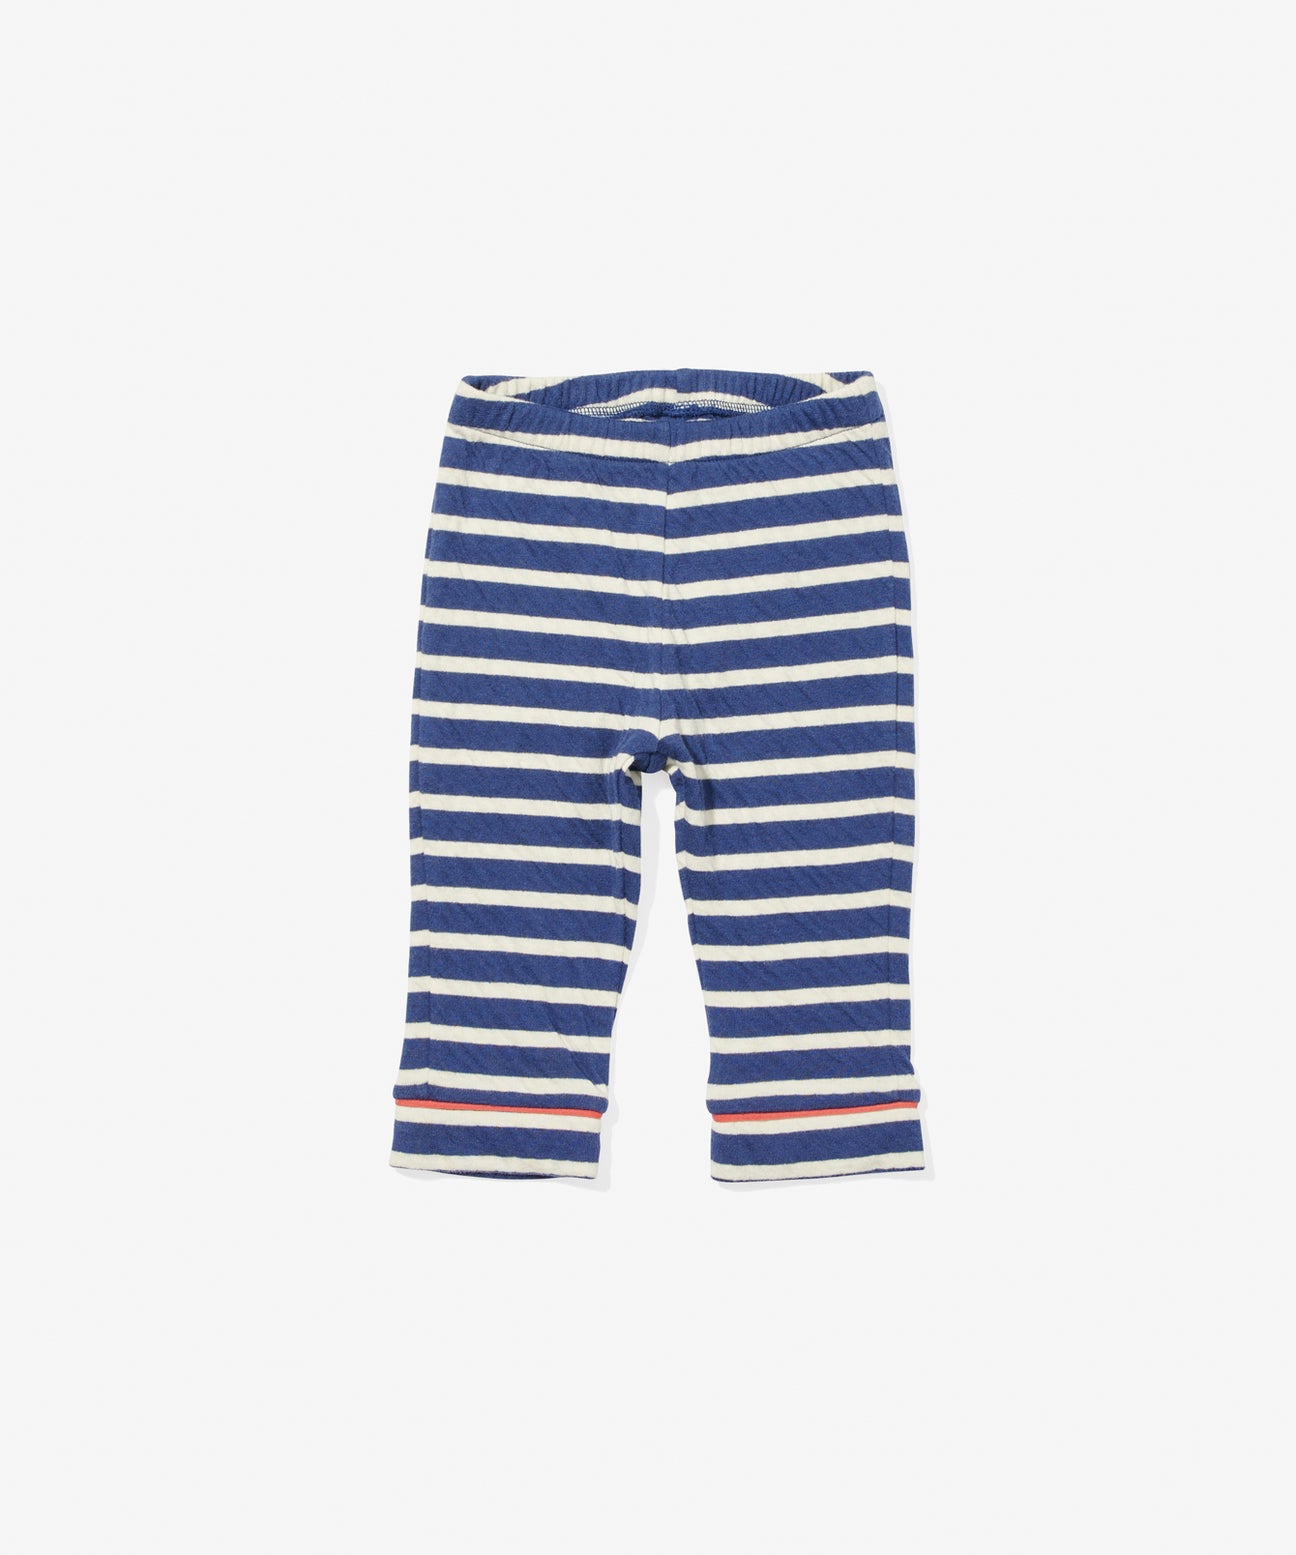 Newborn Clothing and Baby Clothing | Oso & Me – Translation missing: en ...